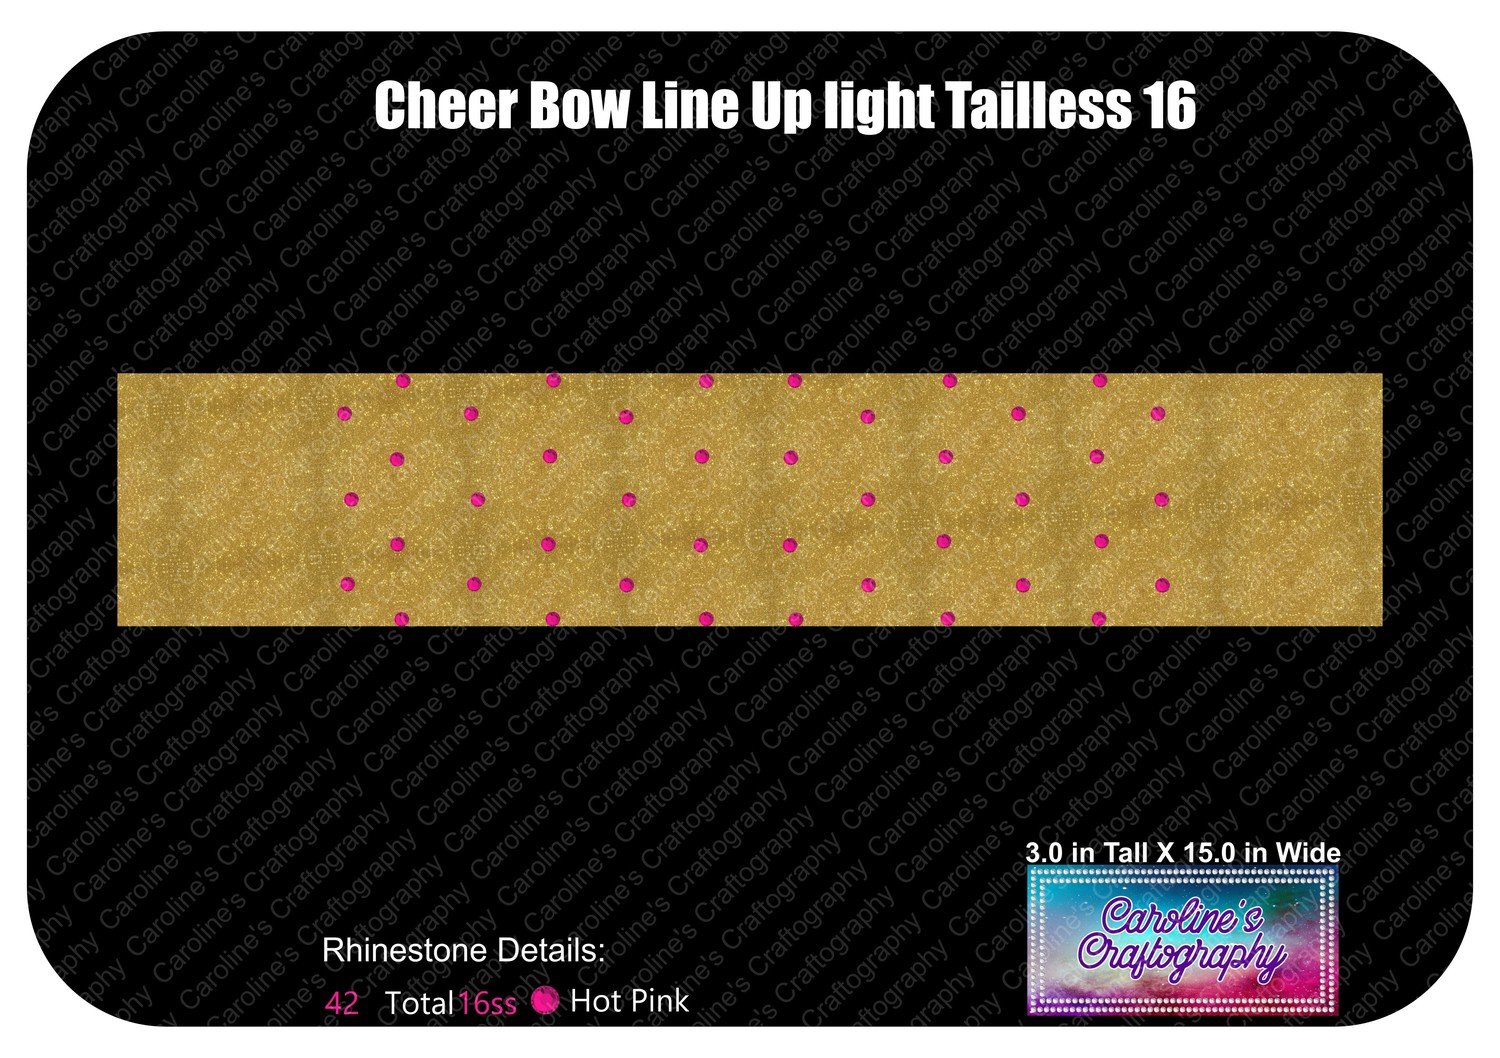 Tailless Cheer Bow Line Up Light 16